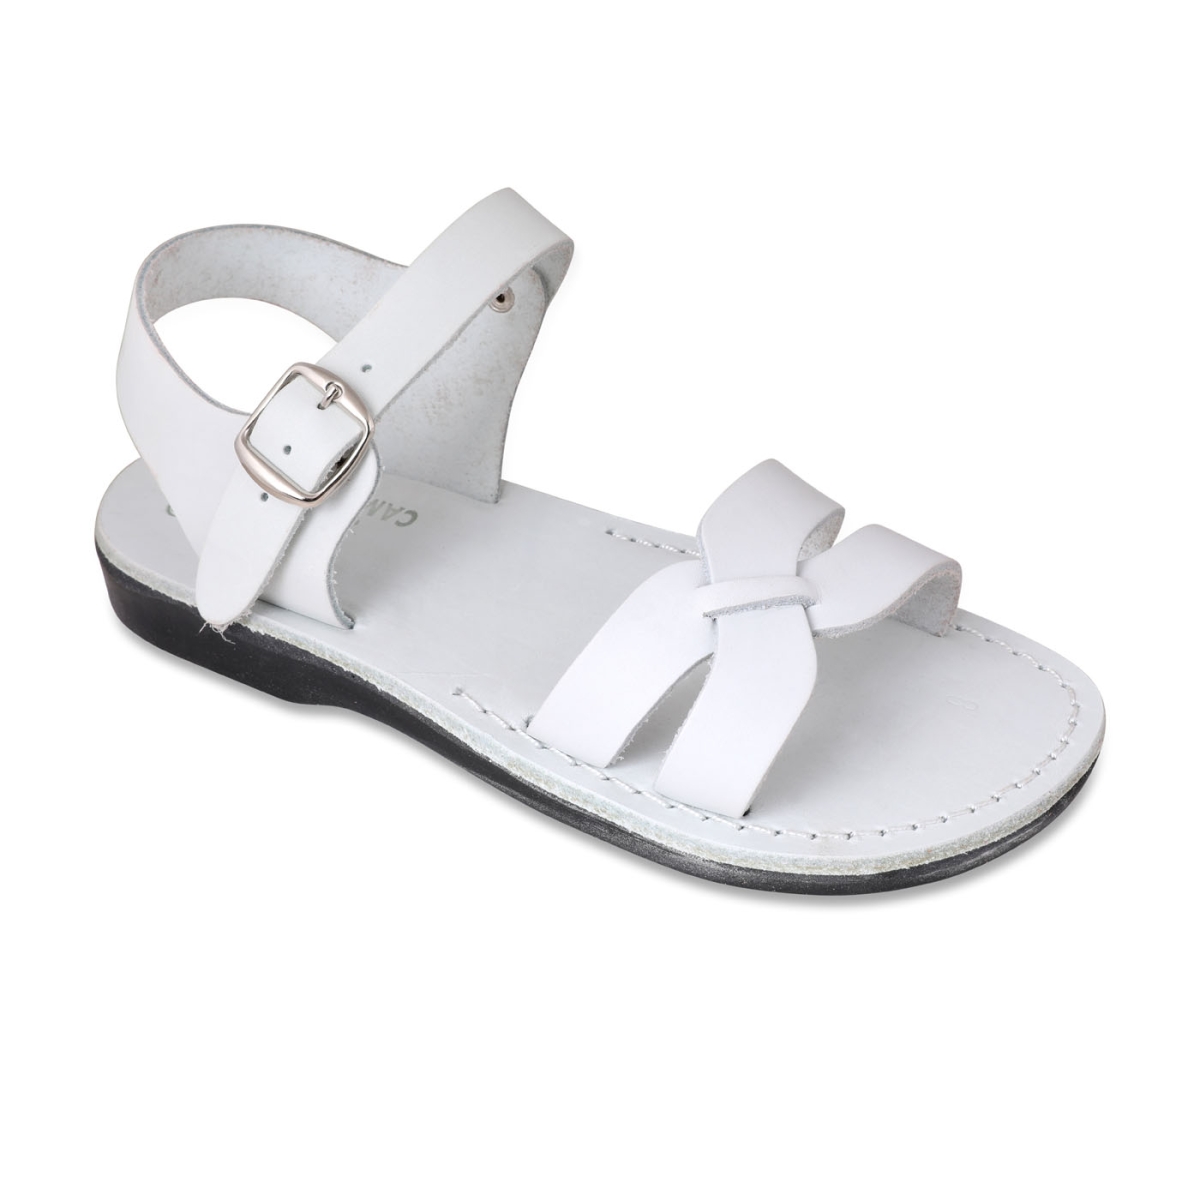 Asa Handmade Leather Unisex  Sandals. Variety of Colors - 1